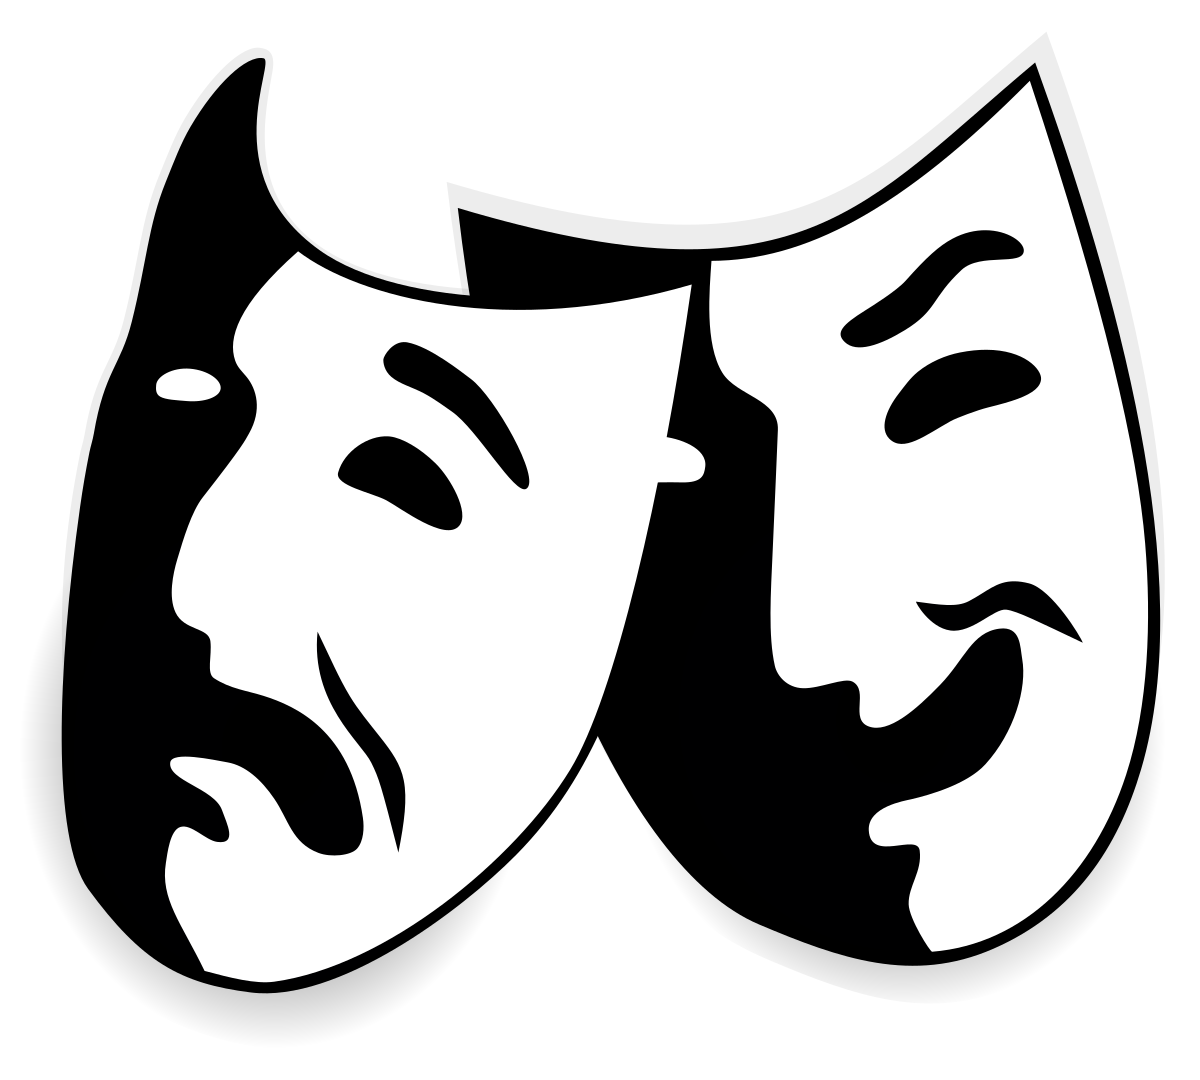 Free Theater Masks Transparent, Download Free Theater Masks Transparent